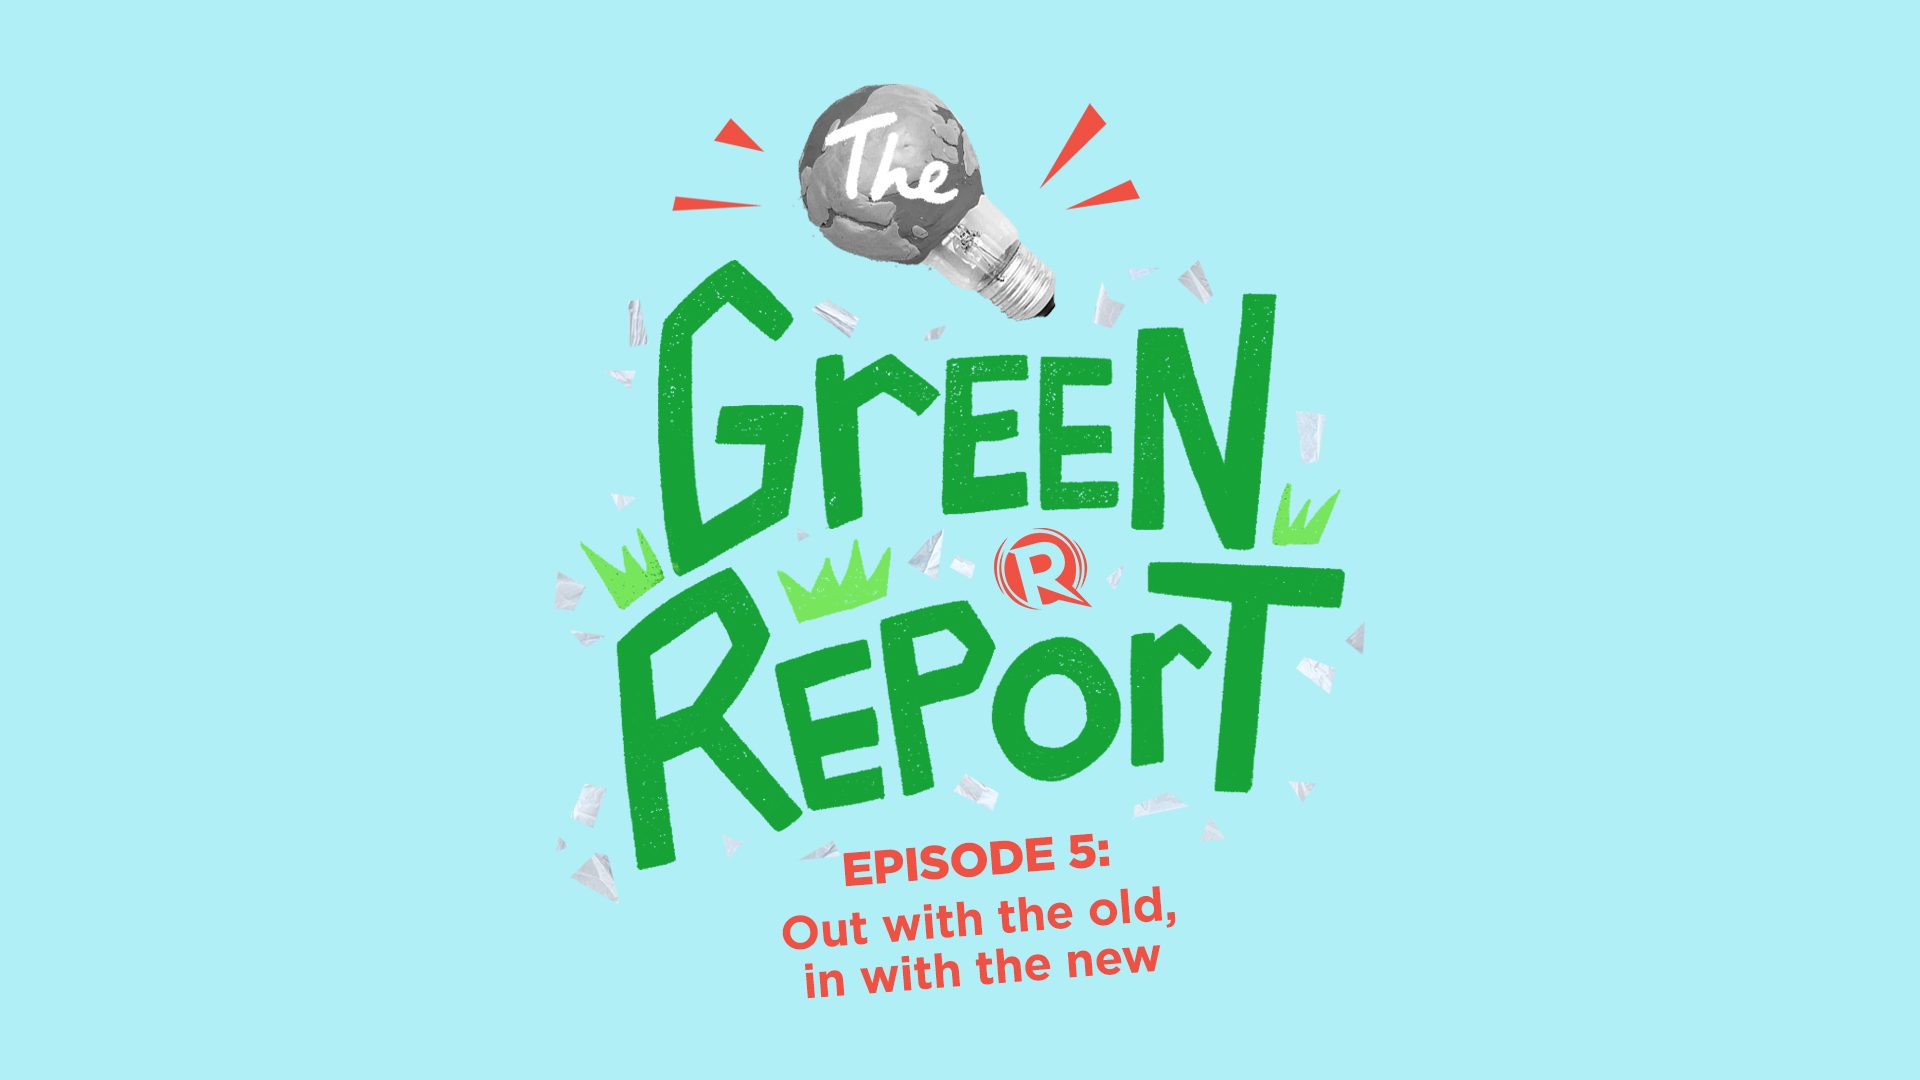 [PODCAST] The Green Report: Out with the old, in with the new